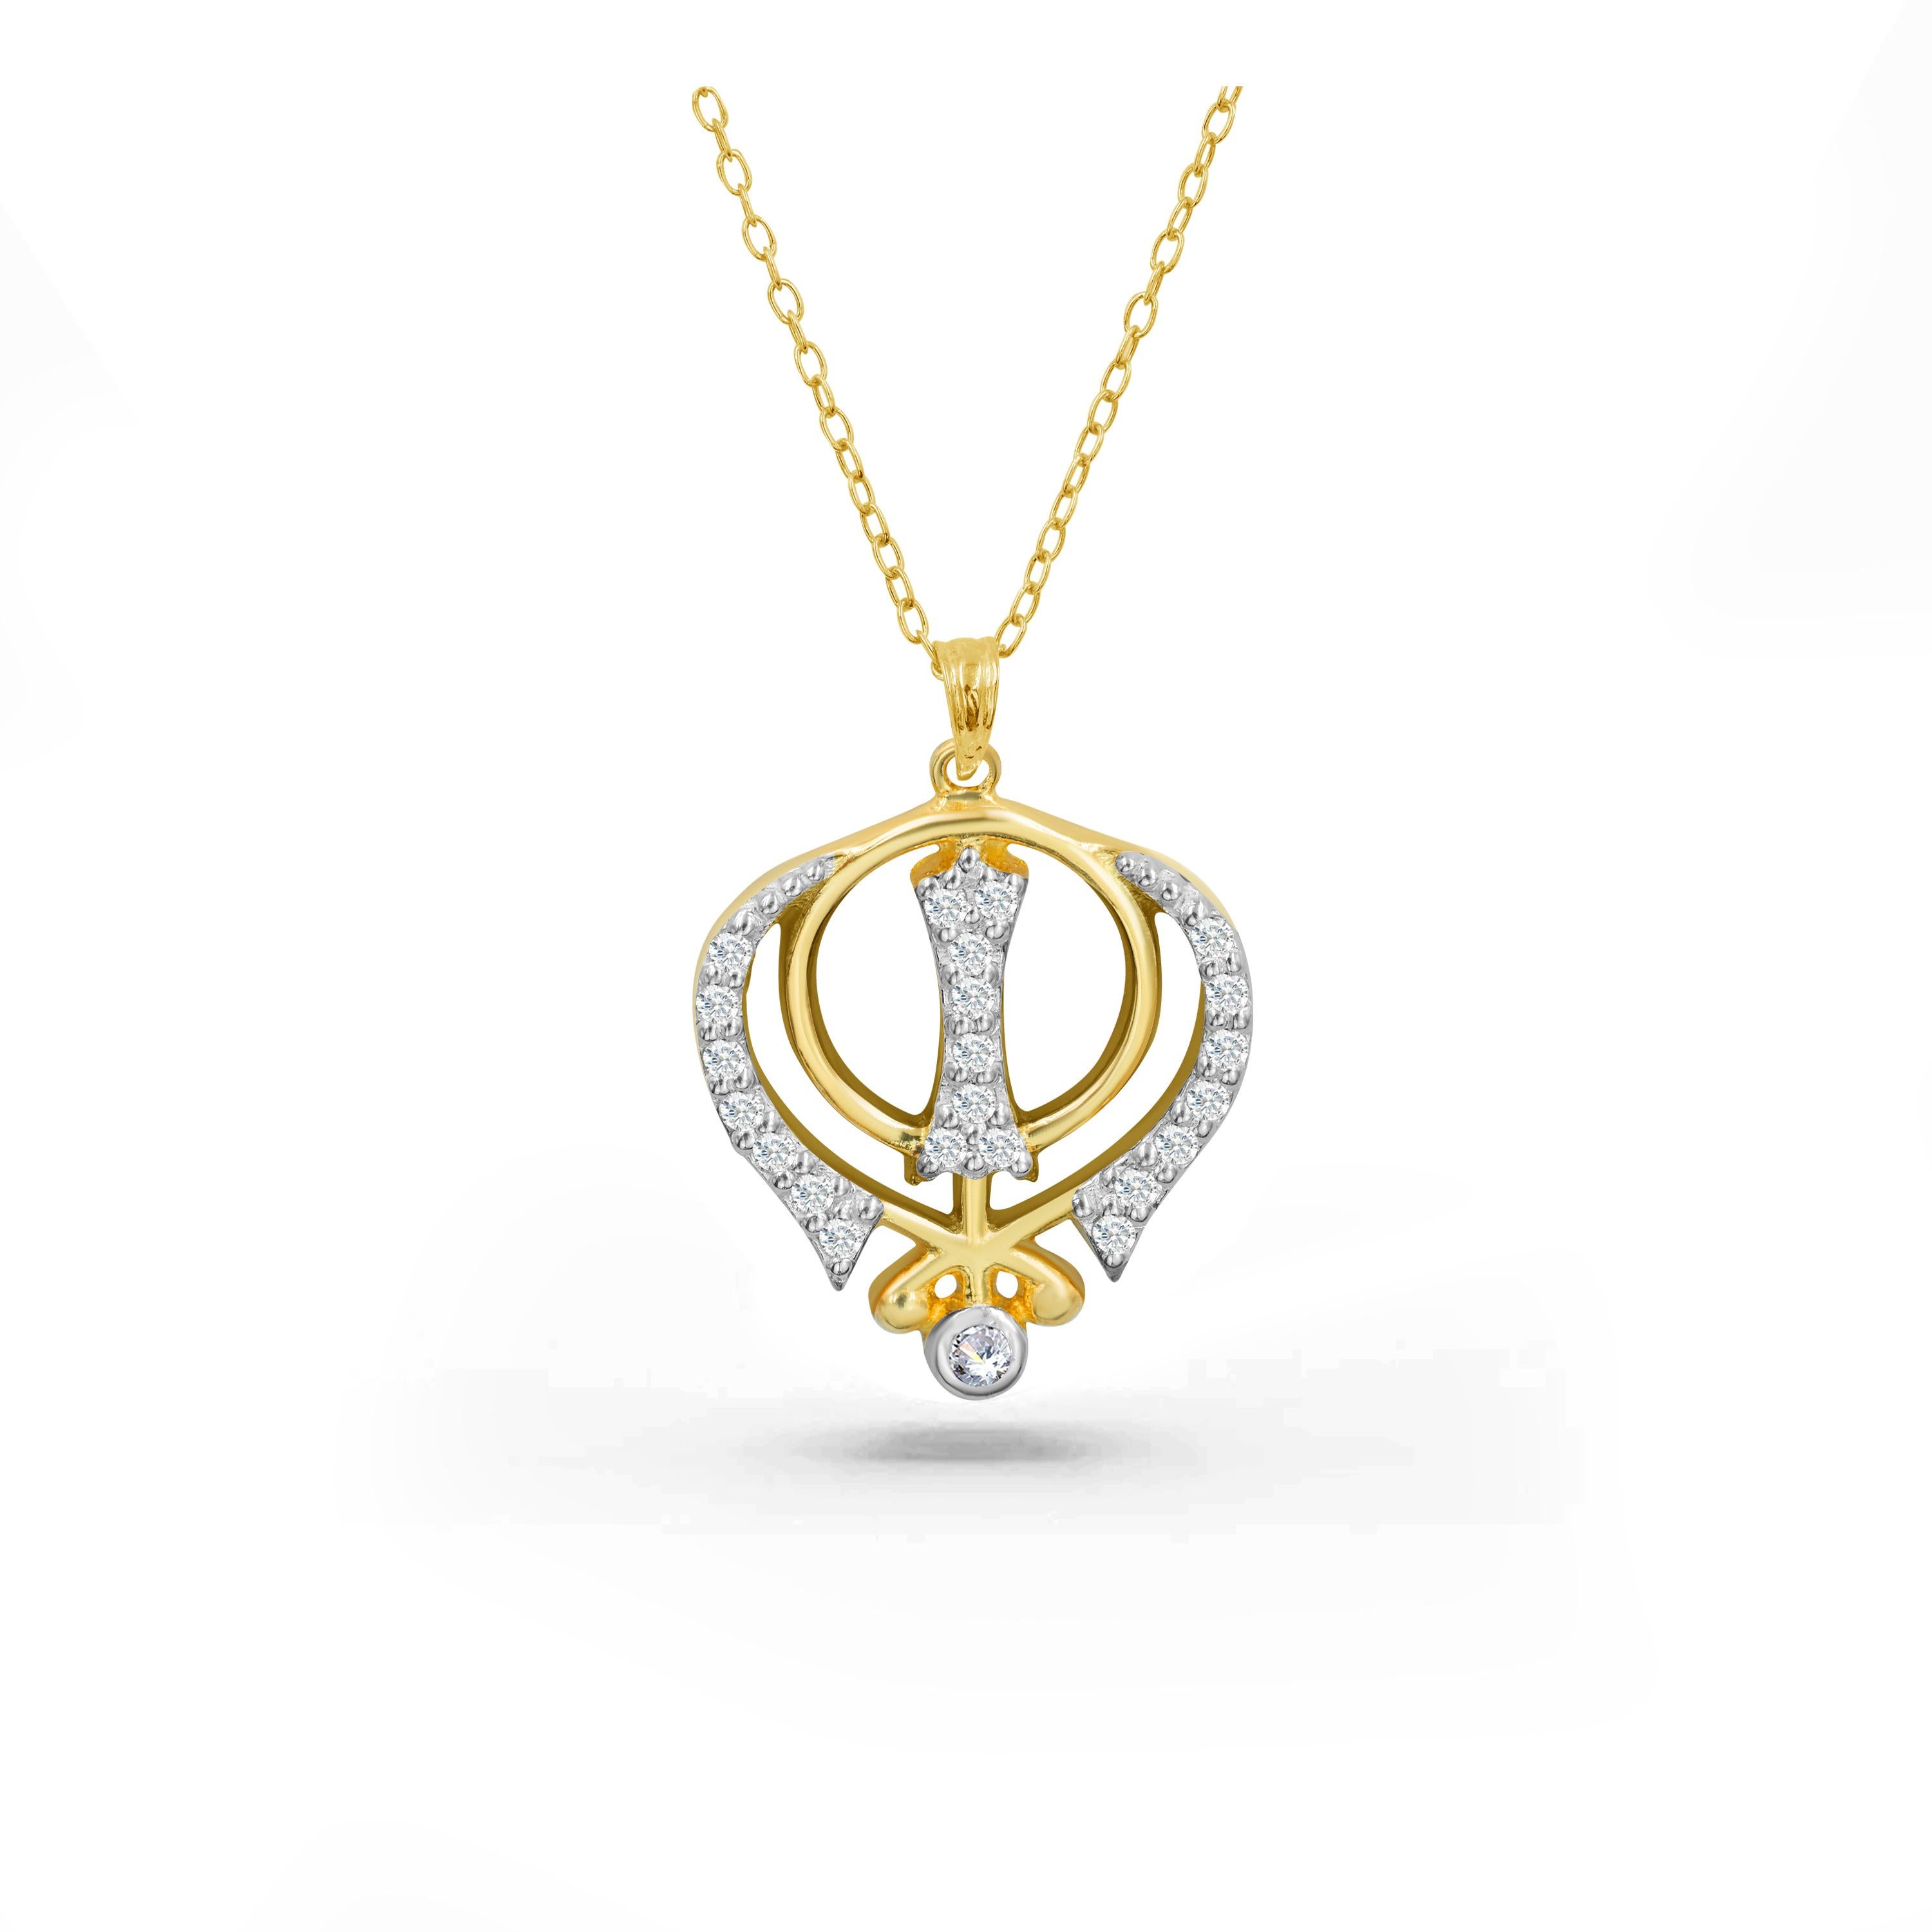 The handcrafted Khanda diamond necklace is perfect everyday wear to bring inner peace and spirituality. We guarantee top-notch quality with 0.12-carat diamond beautifully set in this necklace. This beautiful sikhism religious necklace is a statement